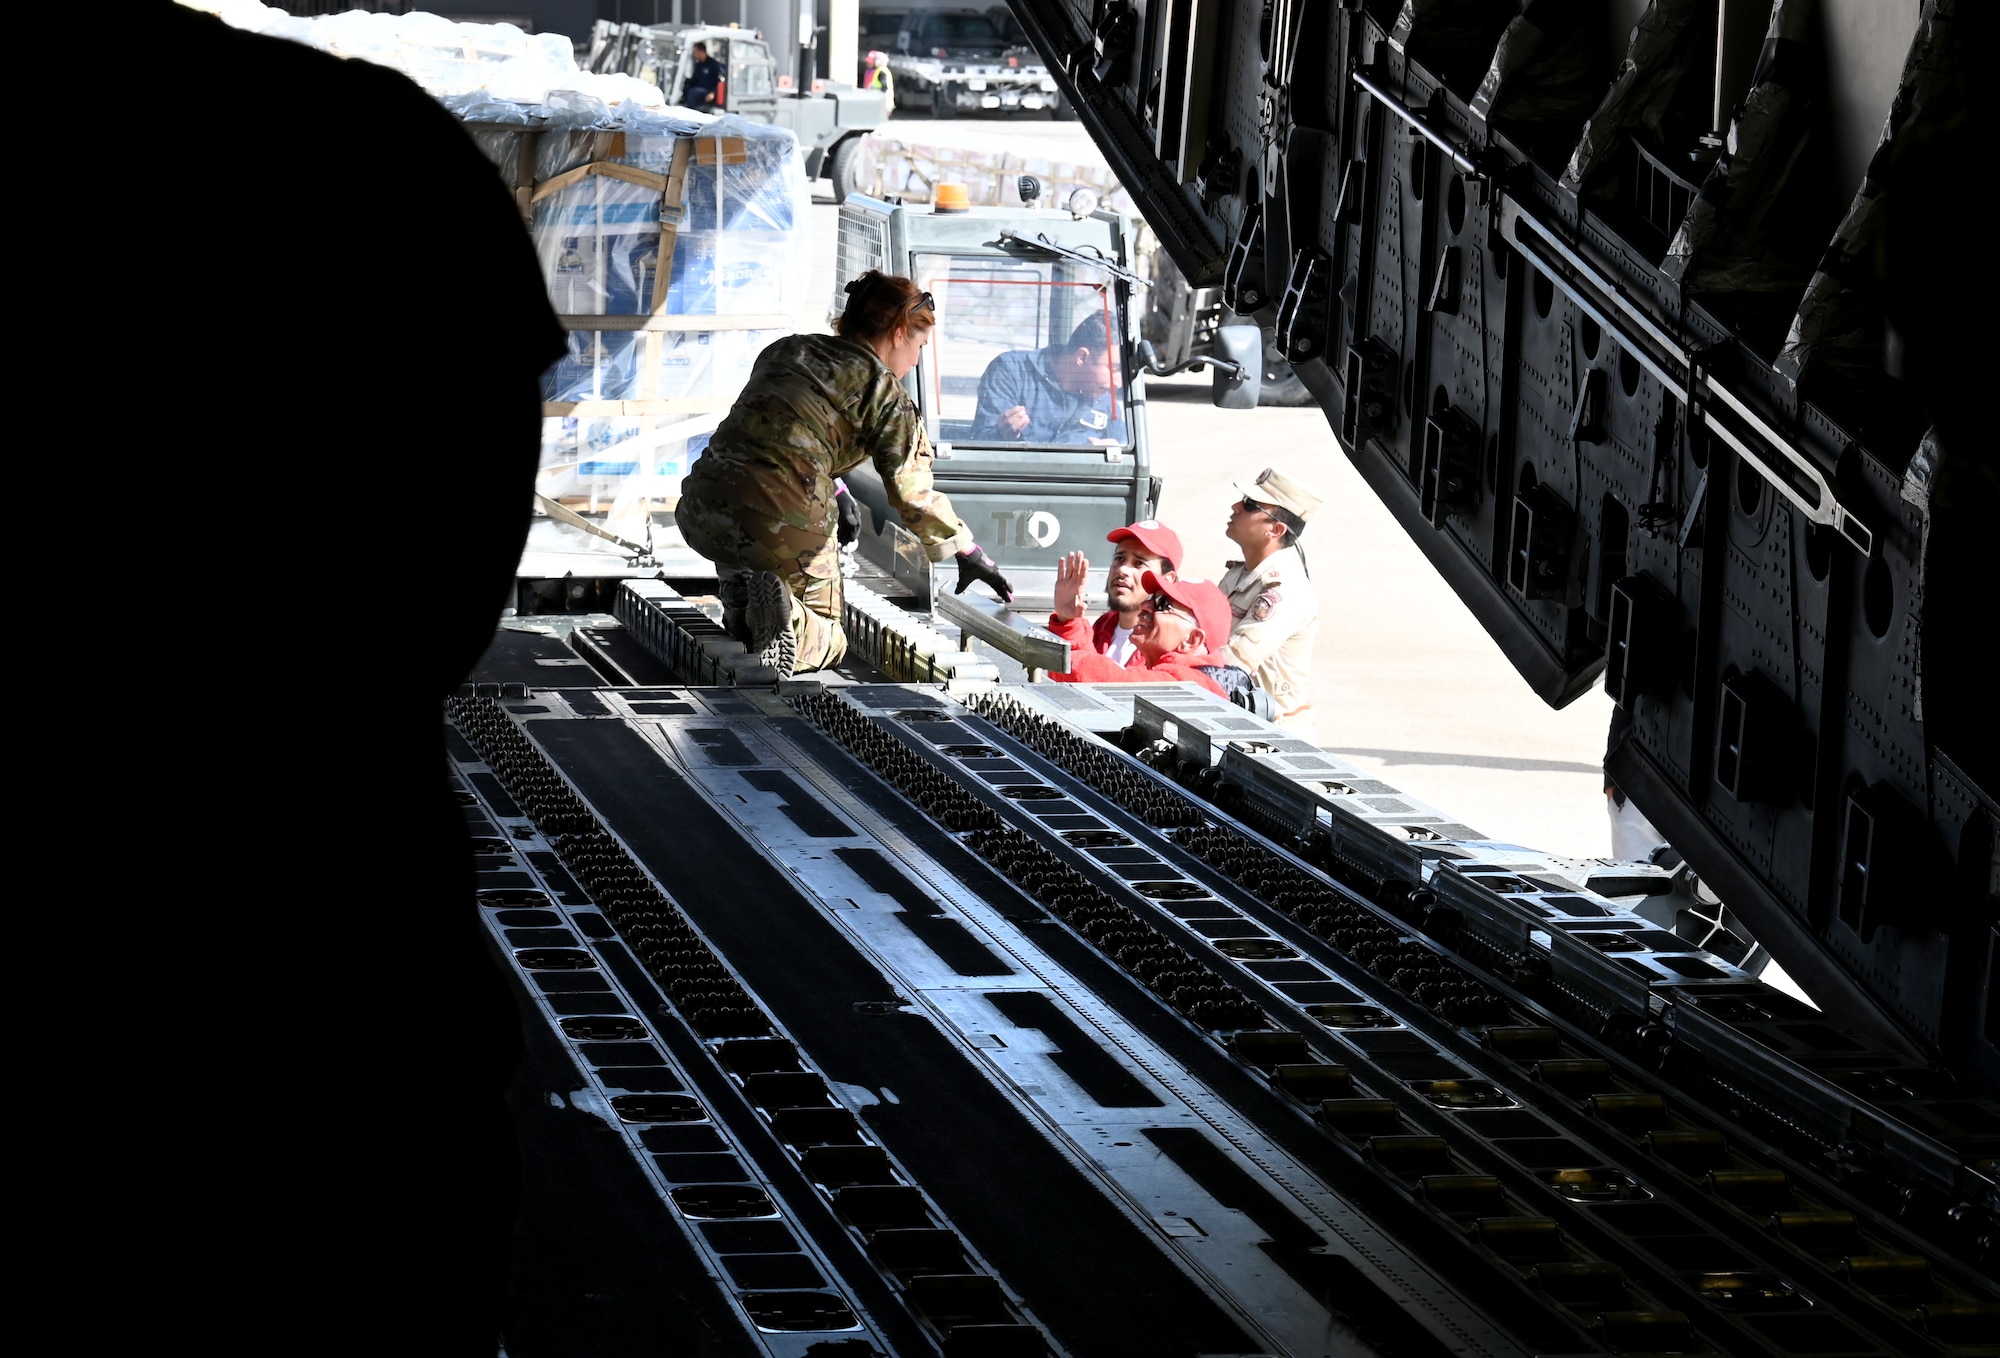 Staff Sgt. Jeanne Caron coordinates a humanitarian aid movement aboard a C-17 with U.S. Agency for International Development throughout the Middle East.